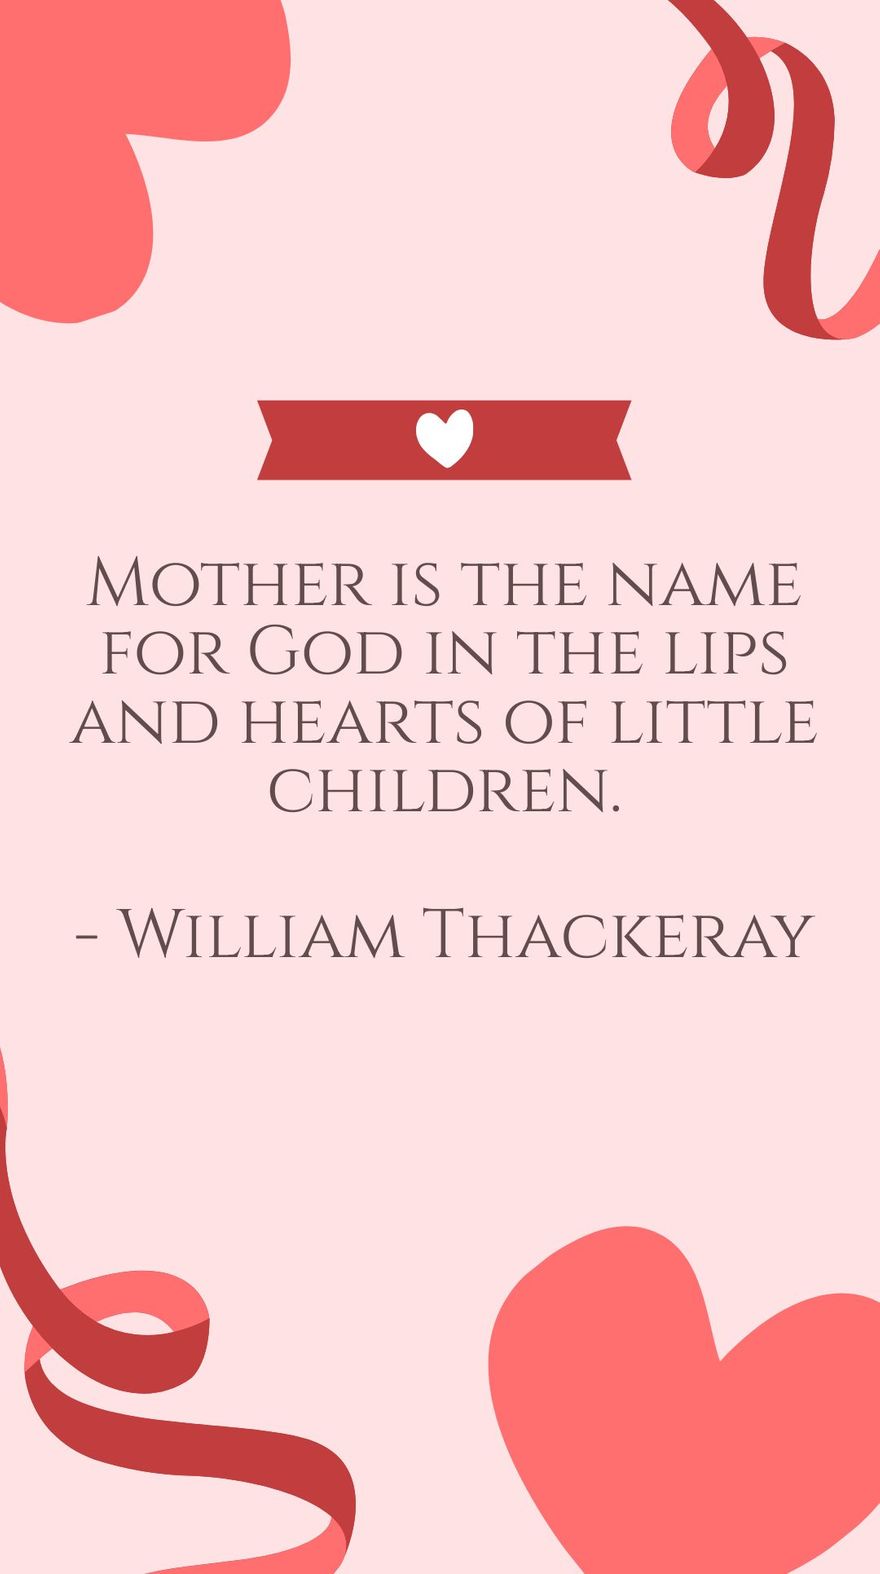 Free William Makepeace Thackeray - Mother is the name for God in the lips and hearts of little children.  in JPG